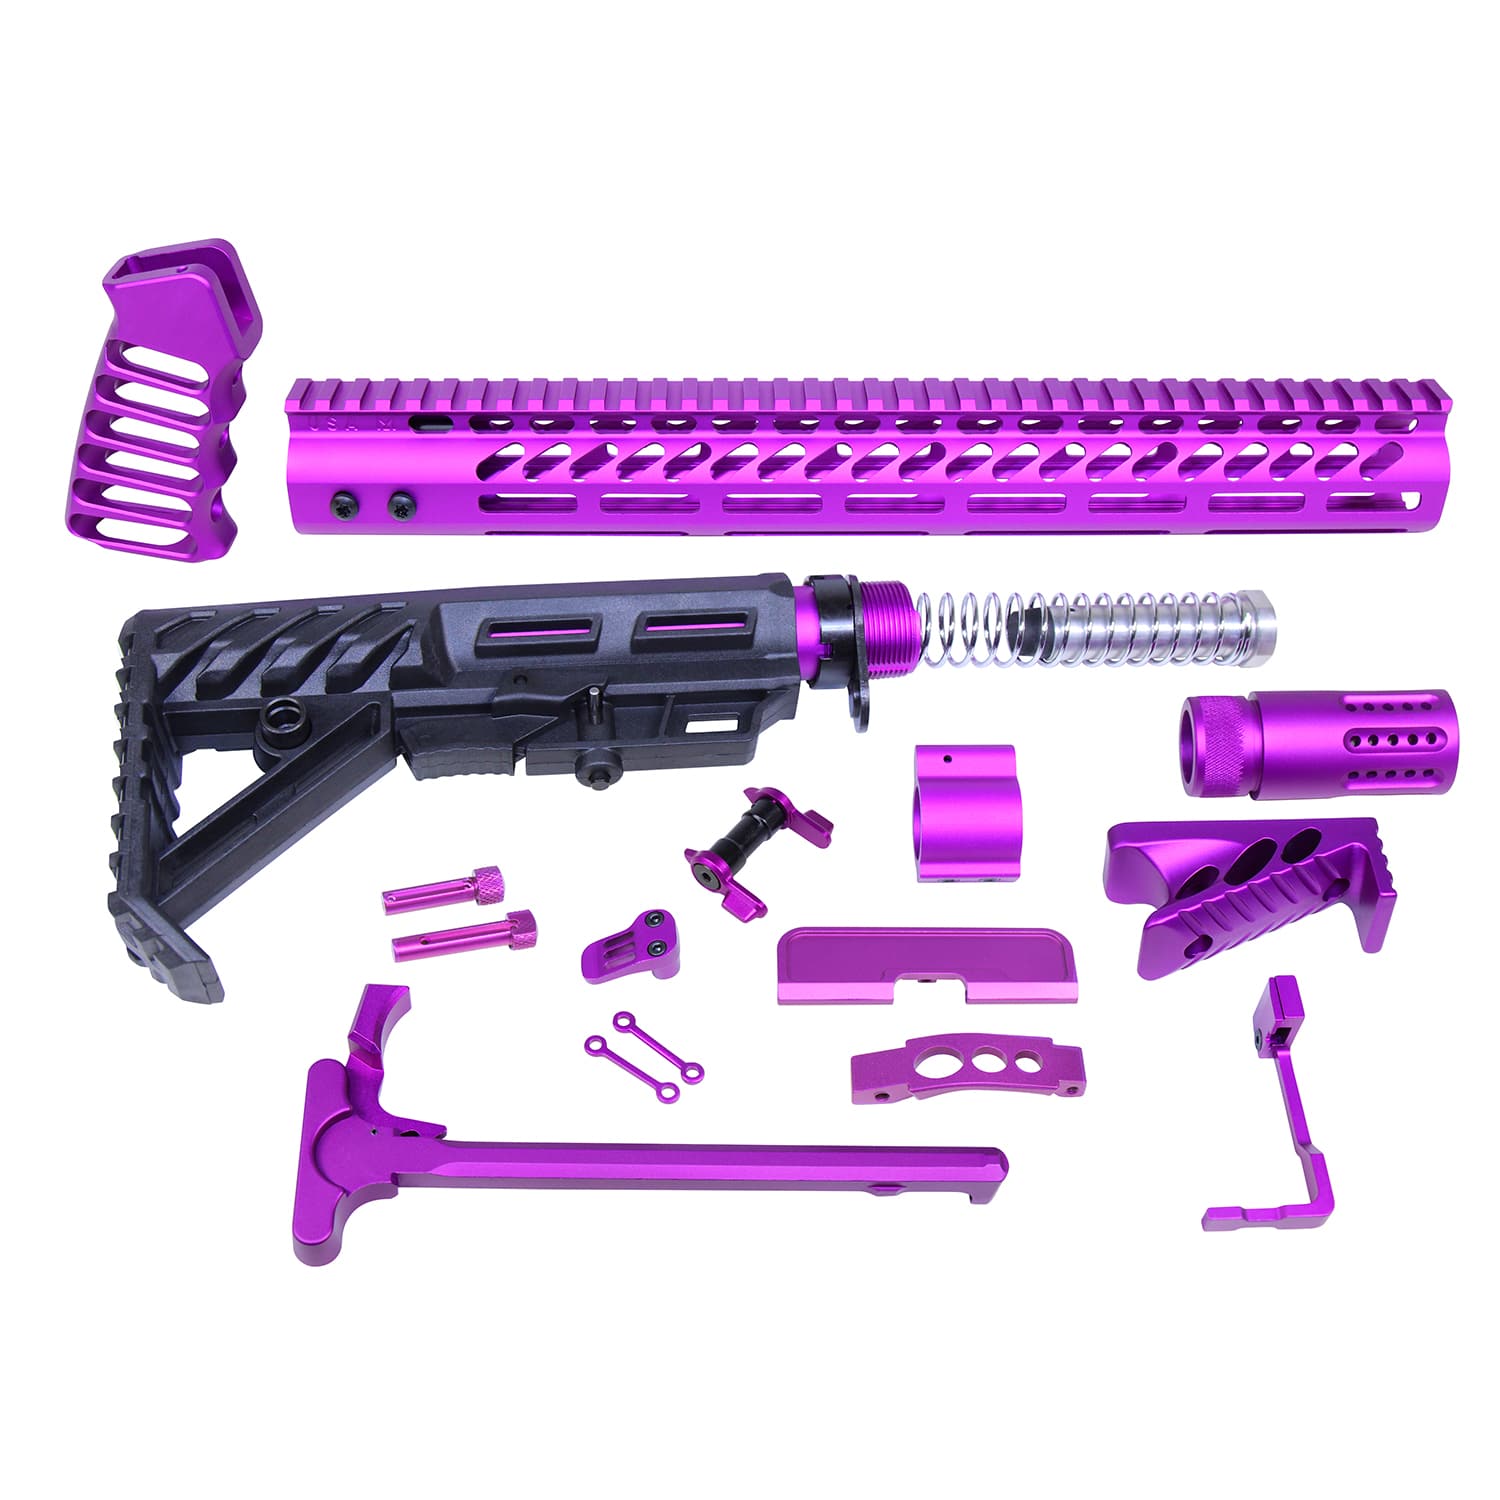 AR-15 Full Rifle Parts Kit in Anodized Purple - Veriforce Tactical.